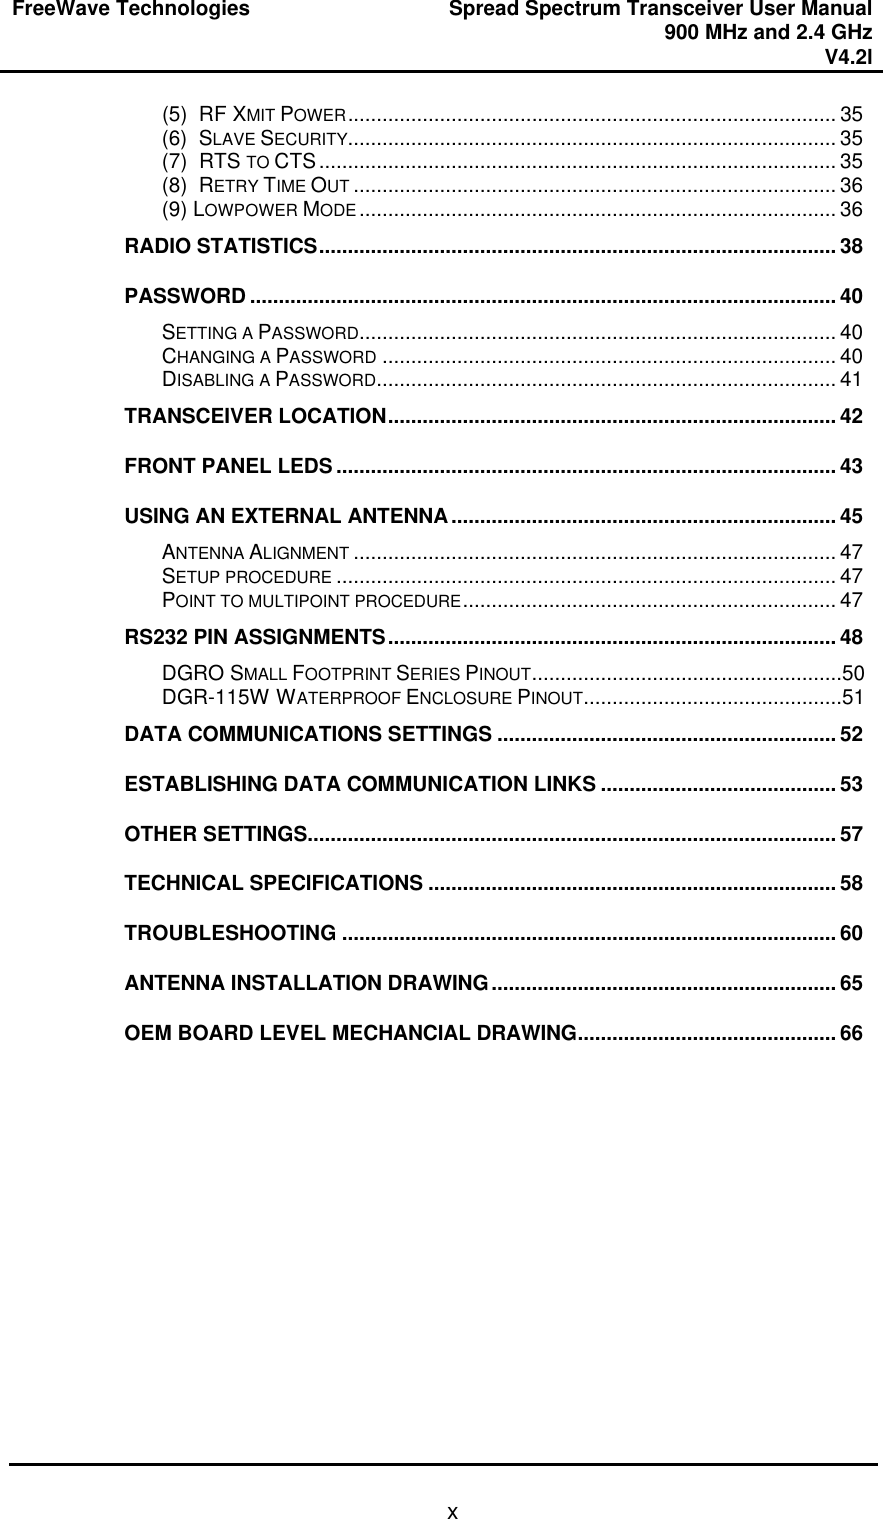 FreeWave Technologies Spread Spectrum Transceiver User Manual 900 MHz and 2.4 GHz V4.2l   x(5)  RF XMIT POWER..................................................................................... 35 (6)  SLAVE SECURITY..................................................................................... 35 (7)  RTS TO CTS.......................................................................................... 35 (8)  RETRY TIME OUT .................................................................................... 36 (9) LOWPOWER MODE ................................................................................... 36 RADIO STATISTICS.......................................................................................... 38 PASSWORD ...................................................................................................... 40 SETTING A PASSWORD................................................................................... 40 CHANGING A PASSWORD ............................................................................... 40 DISABLING A PASSWORD................................................................................ 41 TRANSCEIVER LOCATION.............................................................................. 42 FRONT PANEL LEDS ....................................................................................... 43 USING AN EXTERNAL ANTENNA................................................................... 45 ANTENNA ALIGNMENT .................................................................................... 47 SETUP PROCEDURE ....................................................................................... 47 POINT TO MULTIPOINT PROCEDURE................................................................. 47 RS232 PIN ASSIGNMENTS.............................................................................. 48 DGRO SMALL FOOTPRINT SERIES PINOUT......................................................50 DGR-115W WATERPROOF ENCLOSURE PINOUT.............................................51 DATA COMMUNICATIONS SETTINGS ........................................................... 52 ESTABLISHING DATA COMMUNICATION LINKS ......................................... 53 OTHER SETTINGS............................................................................................ 57 TECHNICAL SPECIFICATIONS ....................................................................... 58 TROUBLESHOOTING ...................................................................................... 60 ANTENNA INSTALLATION DRAWING............................................................ 65 OEM BOARD LEVEL MECHANCIAL DRAWING............................................. 66  